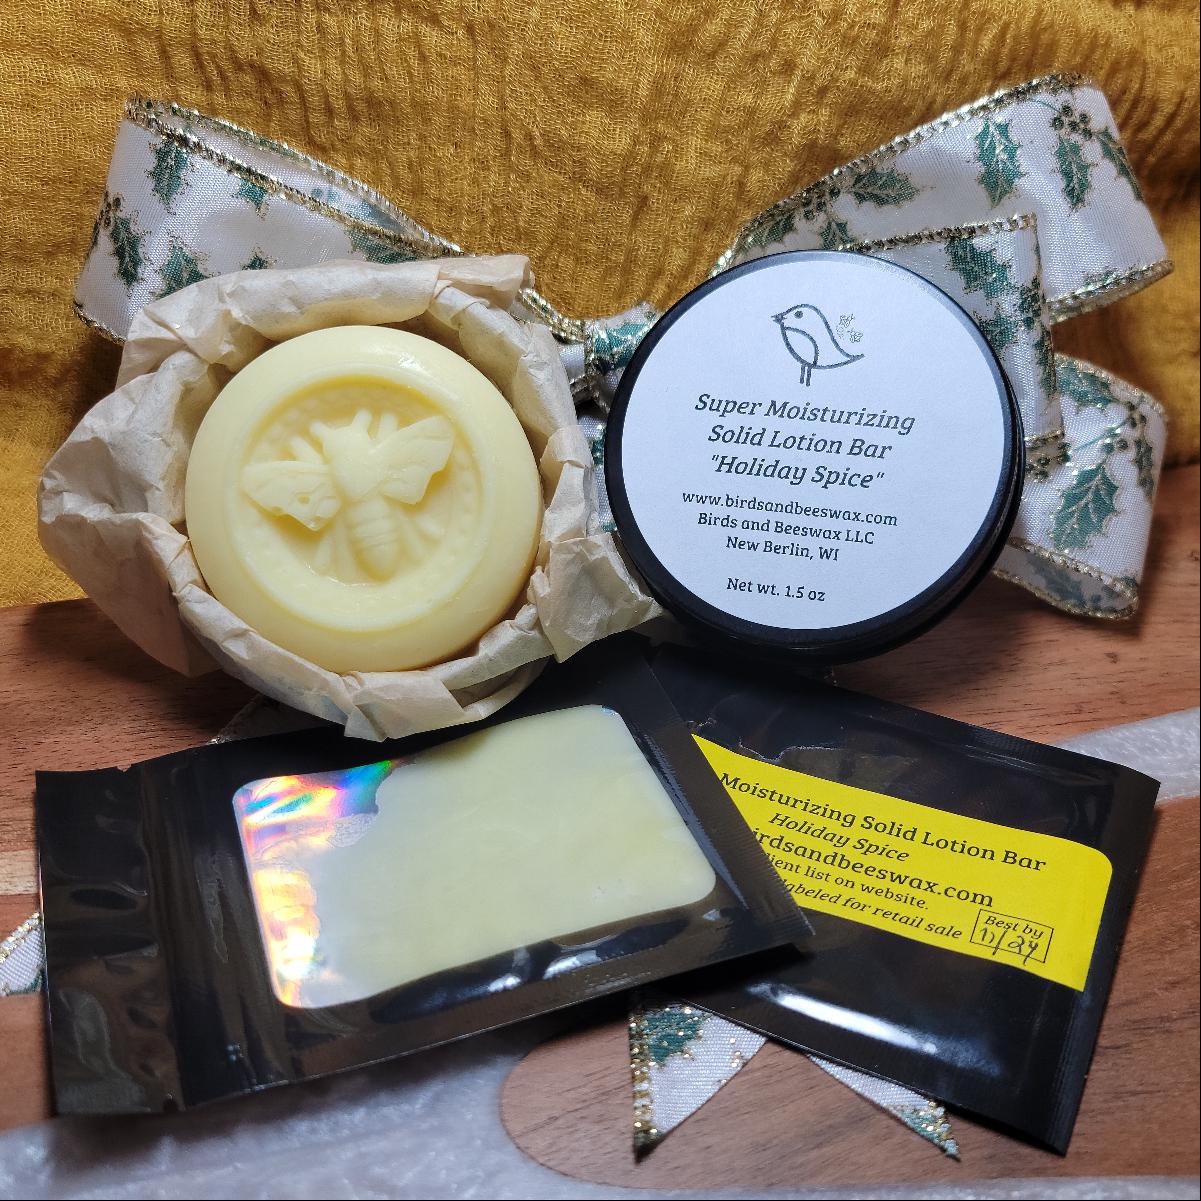 Samples of Extra Moisturizing Solid Lotion Bar